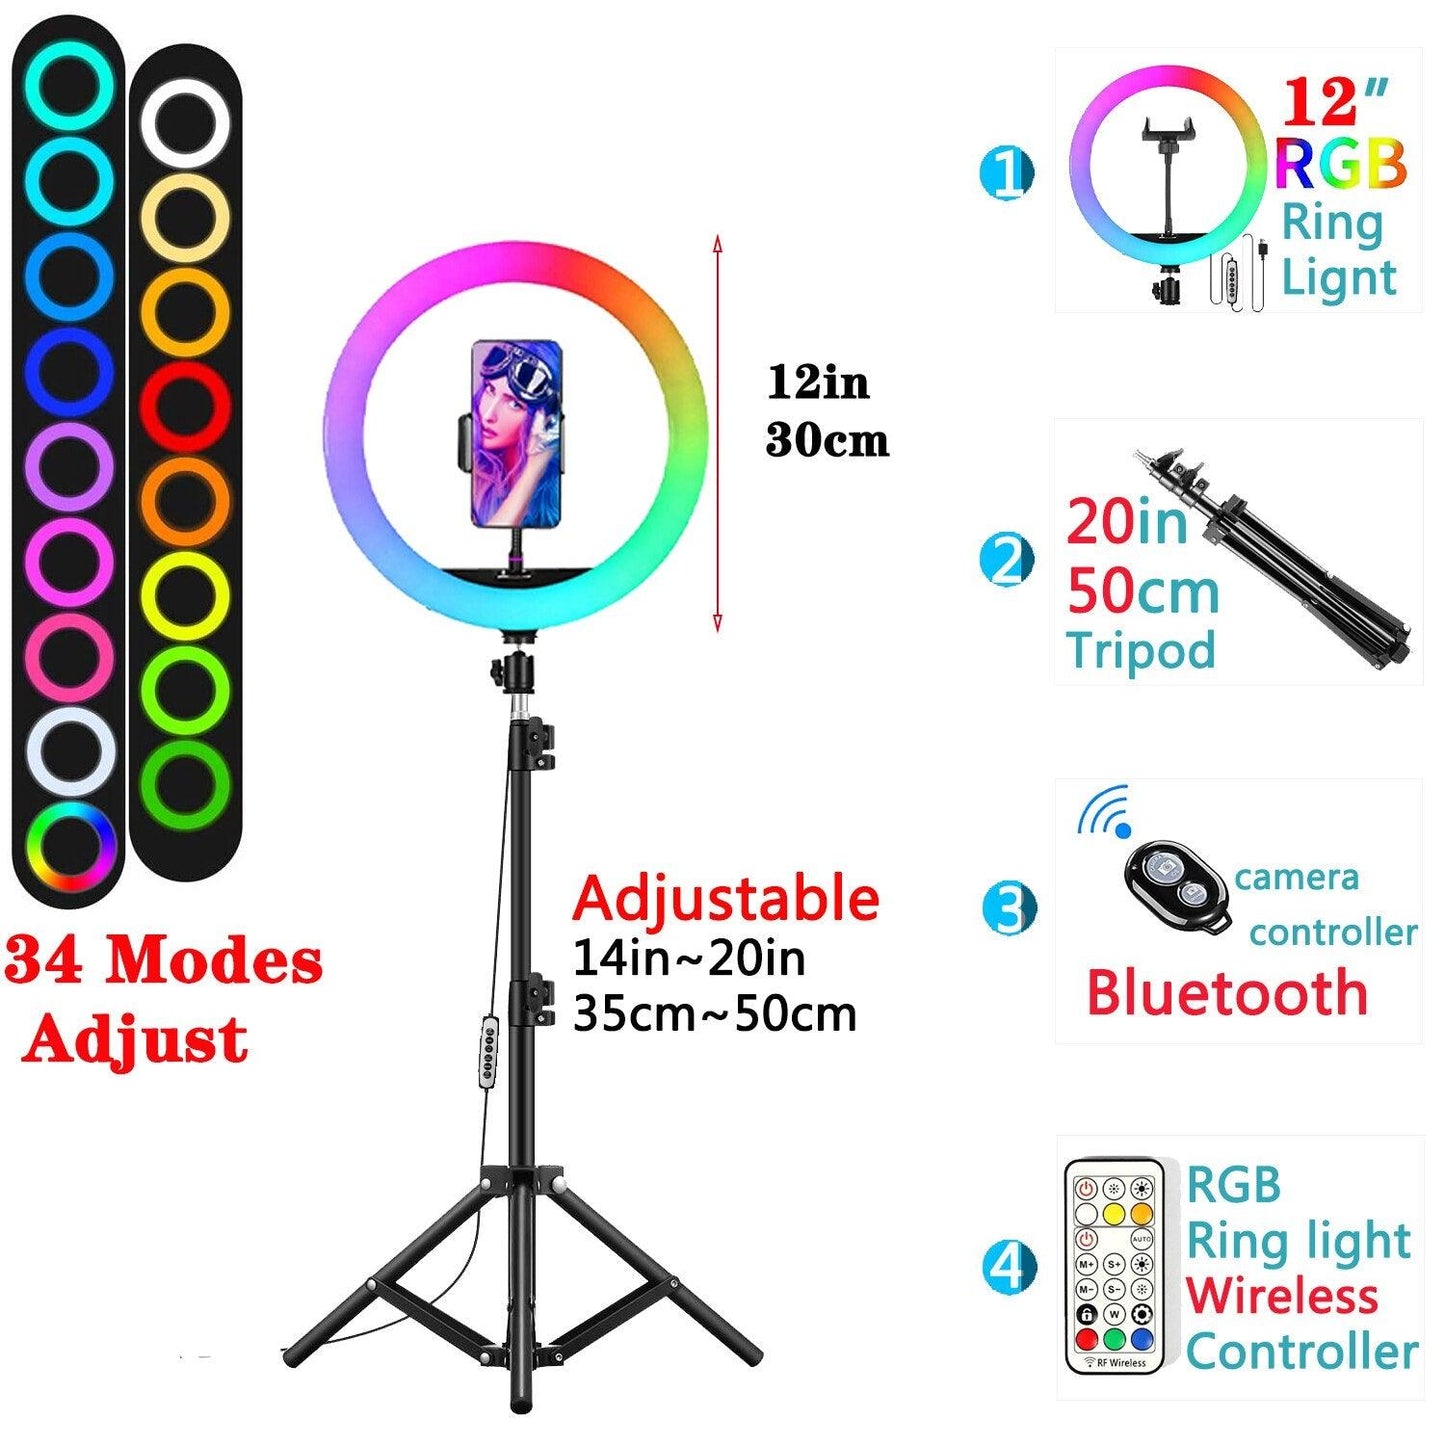 12" Selfie Ring Light - my LUX style